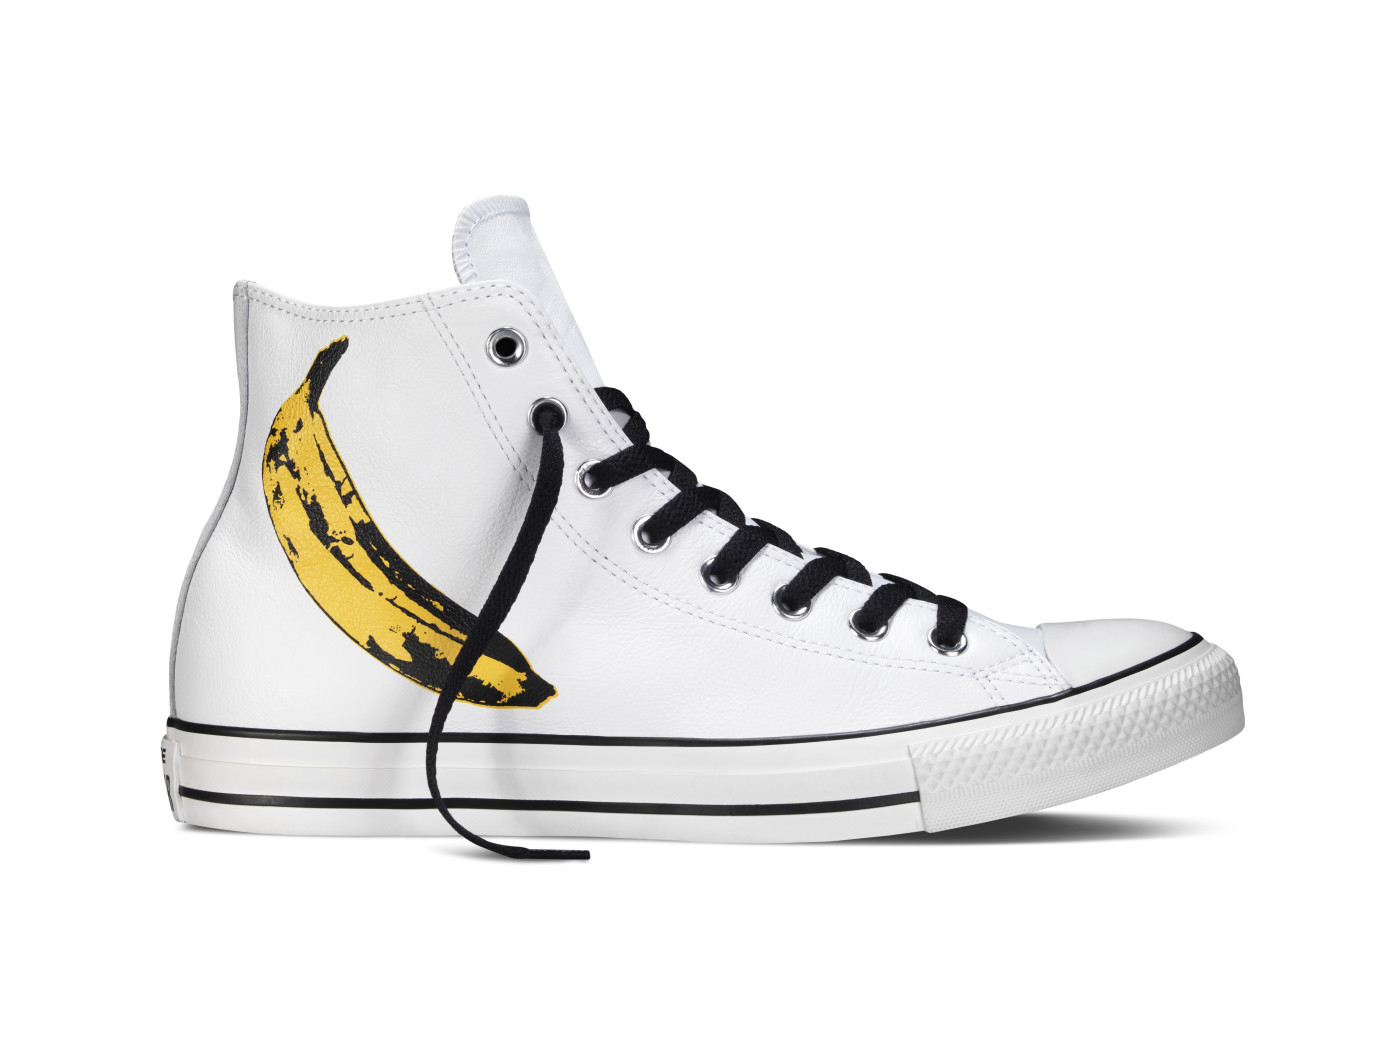 Converse releasing another tribute to 